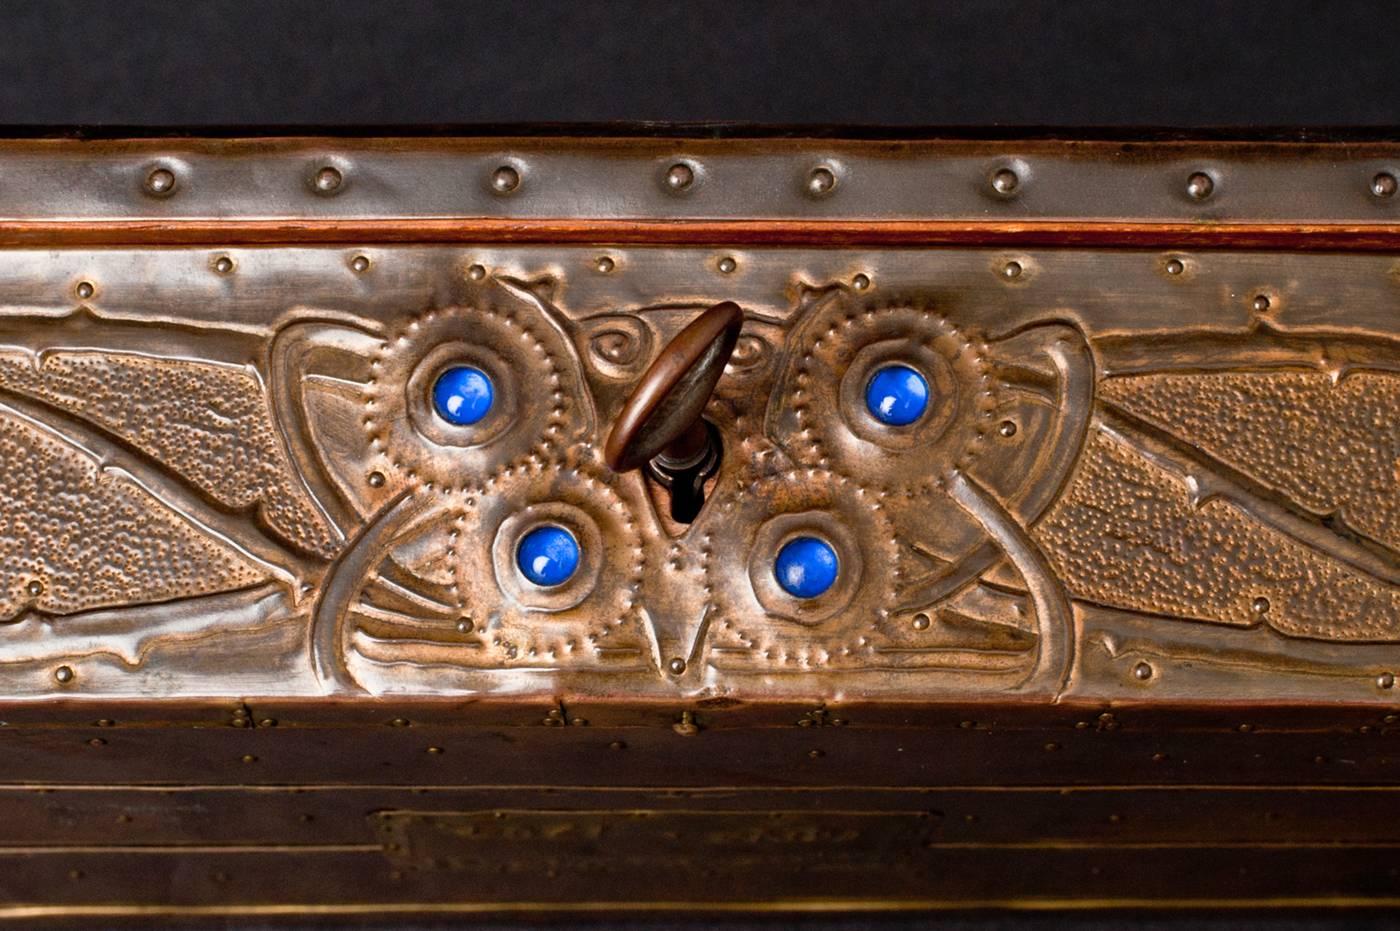 Made while his studio was located above the famous S. Bing l’Art Nouveau salon in Paris, this metal-hinged wood box is an excellent example of Alfred Daguet’s work.  What unifies this piece is the repeating Eye of Providence motif to which Daguet